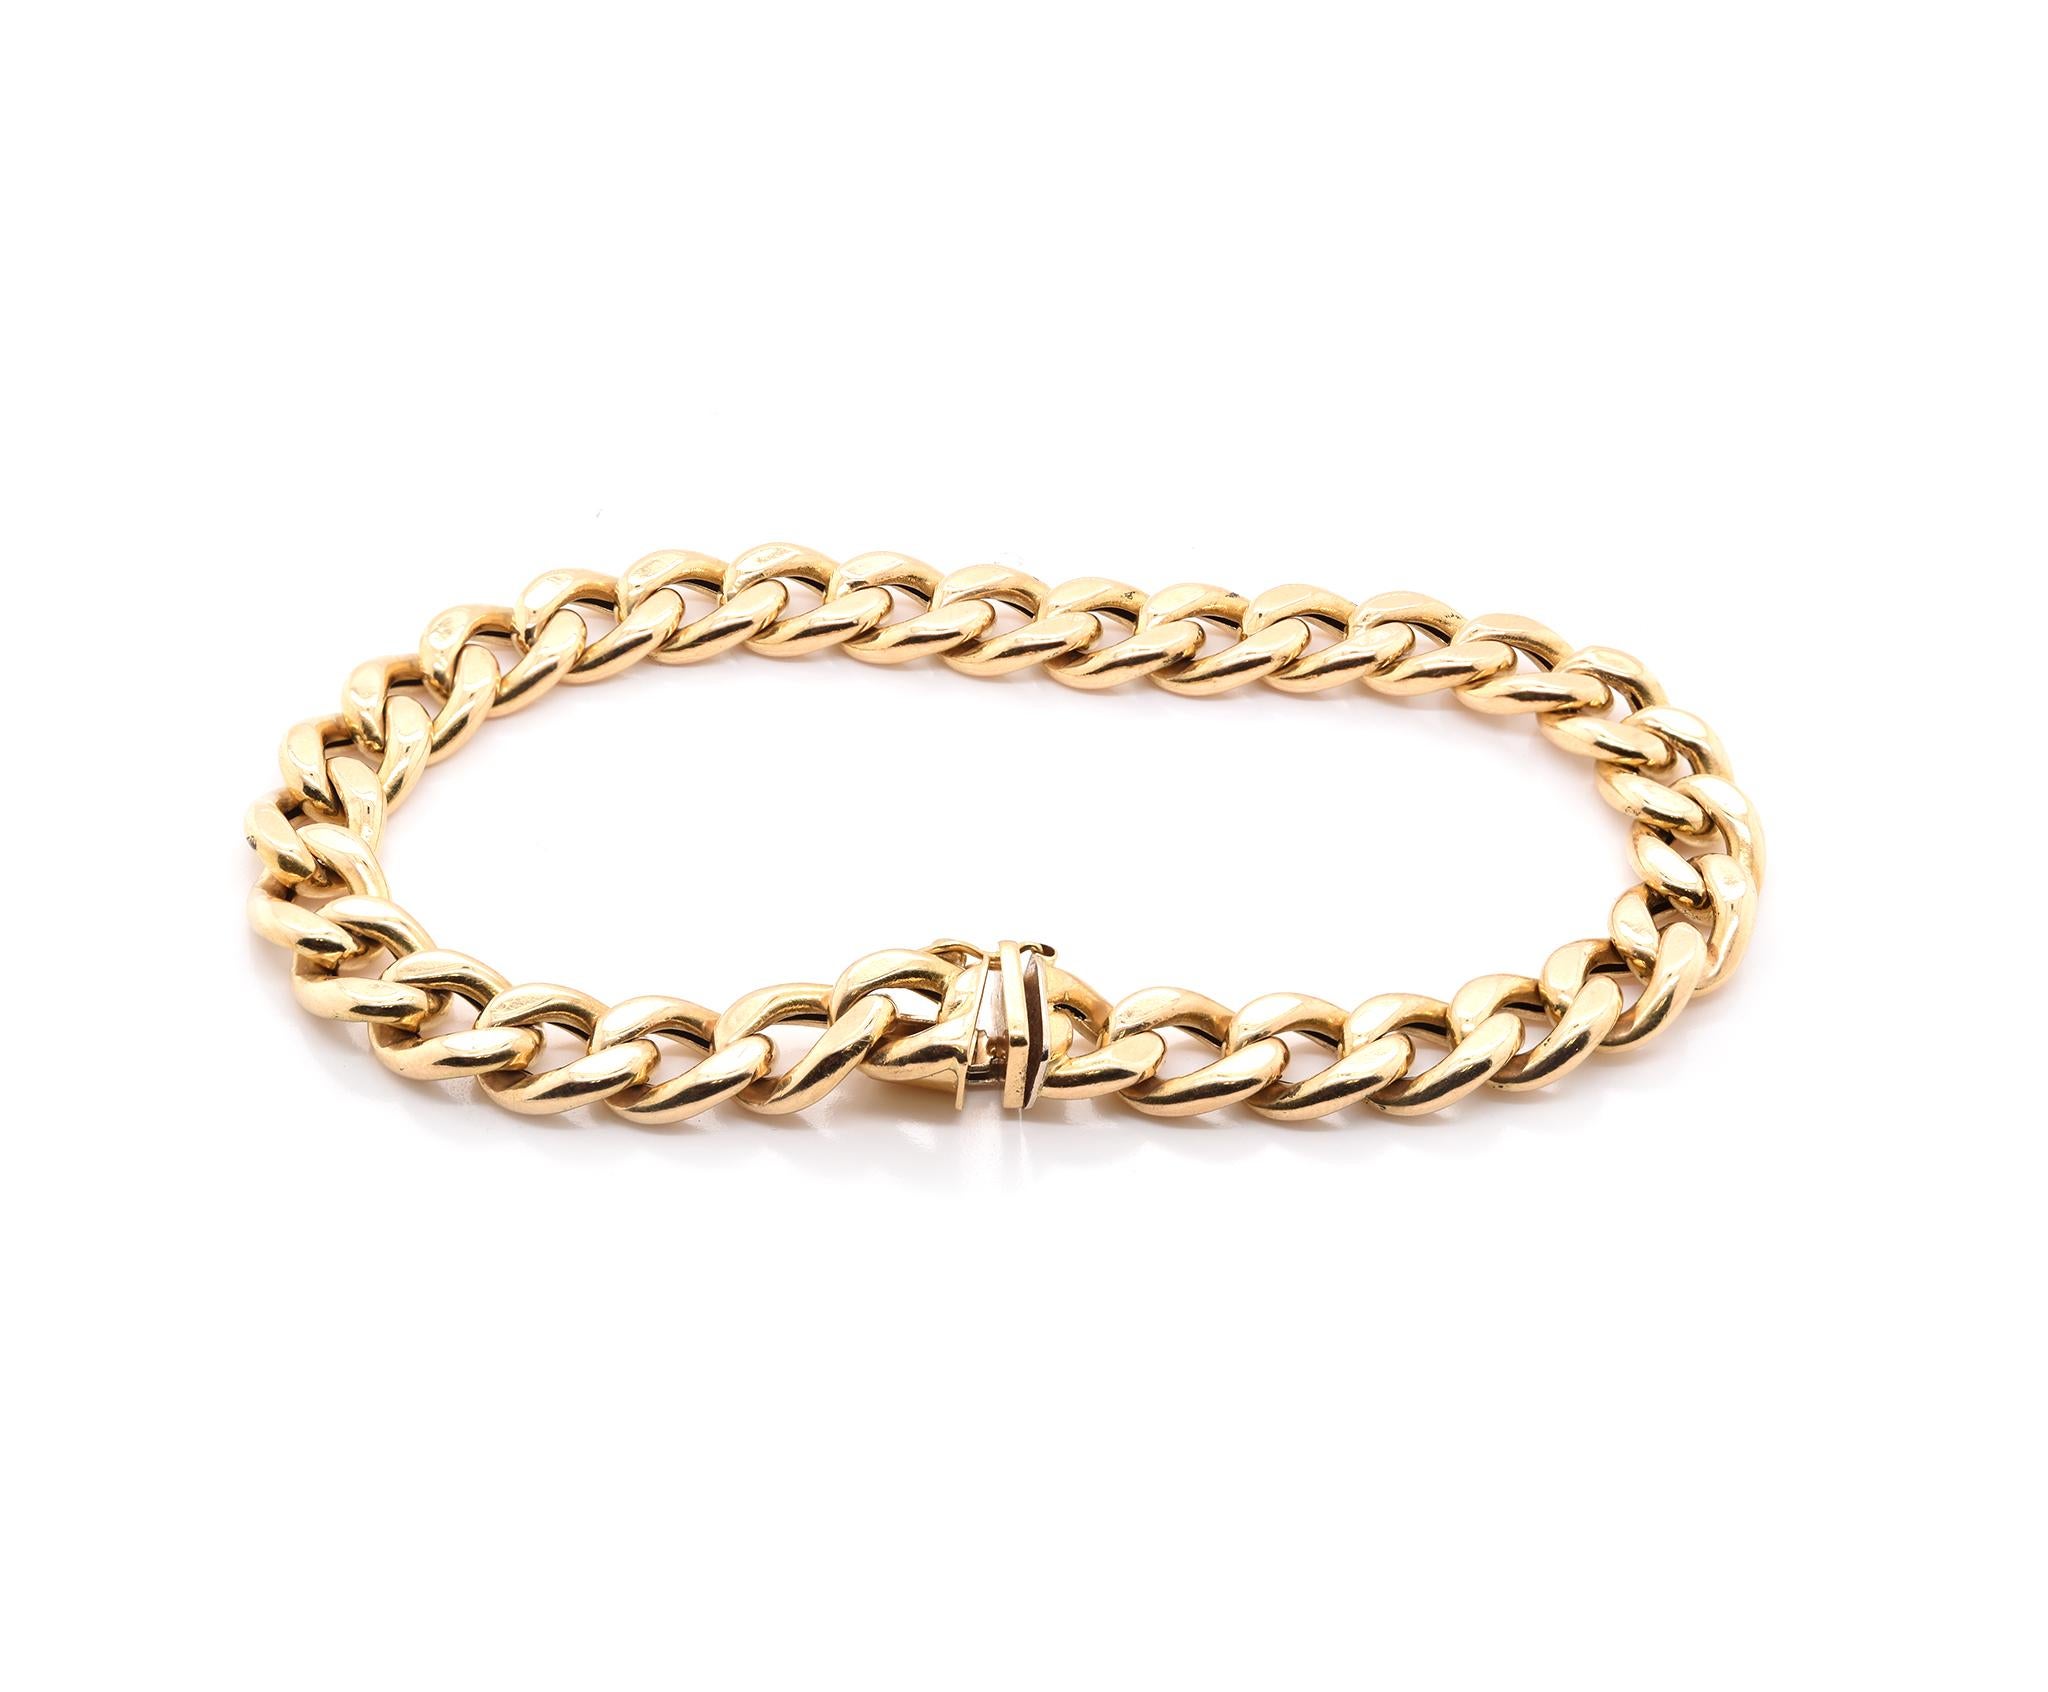 Designer: custom
Material: 18K yellow gold 
Dimensions: bracelet will fit up to an 8.25-inch wrist
Weight: 20.26 grams
